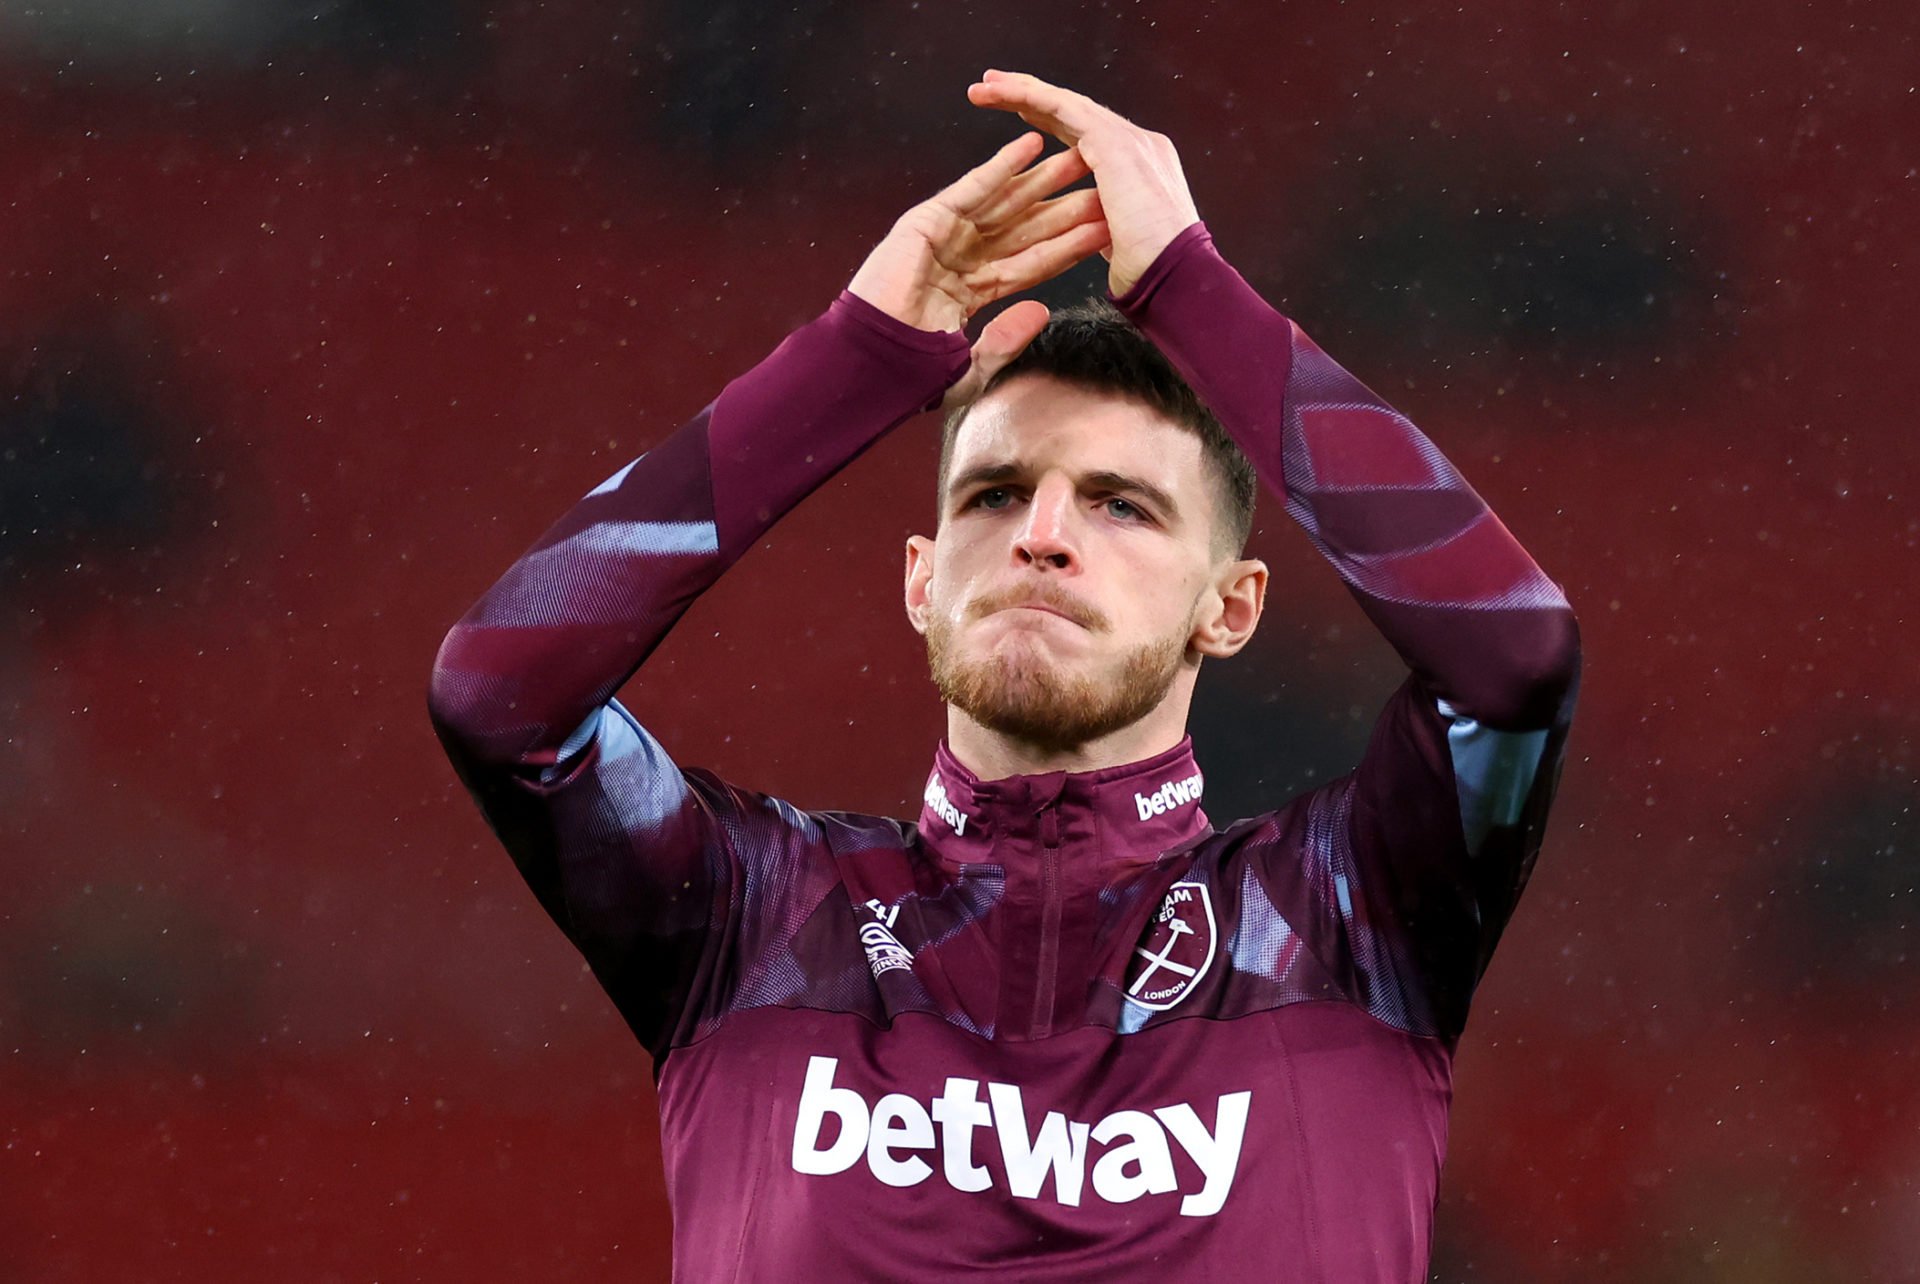 West Ham 'special place to play' says Rice, as Hammers maintain